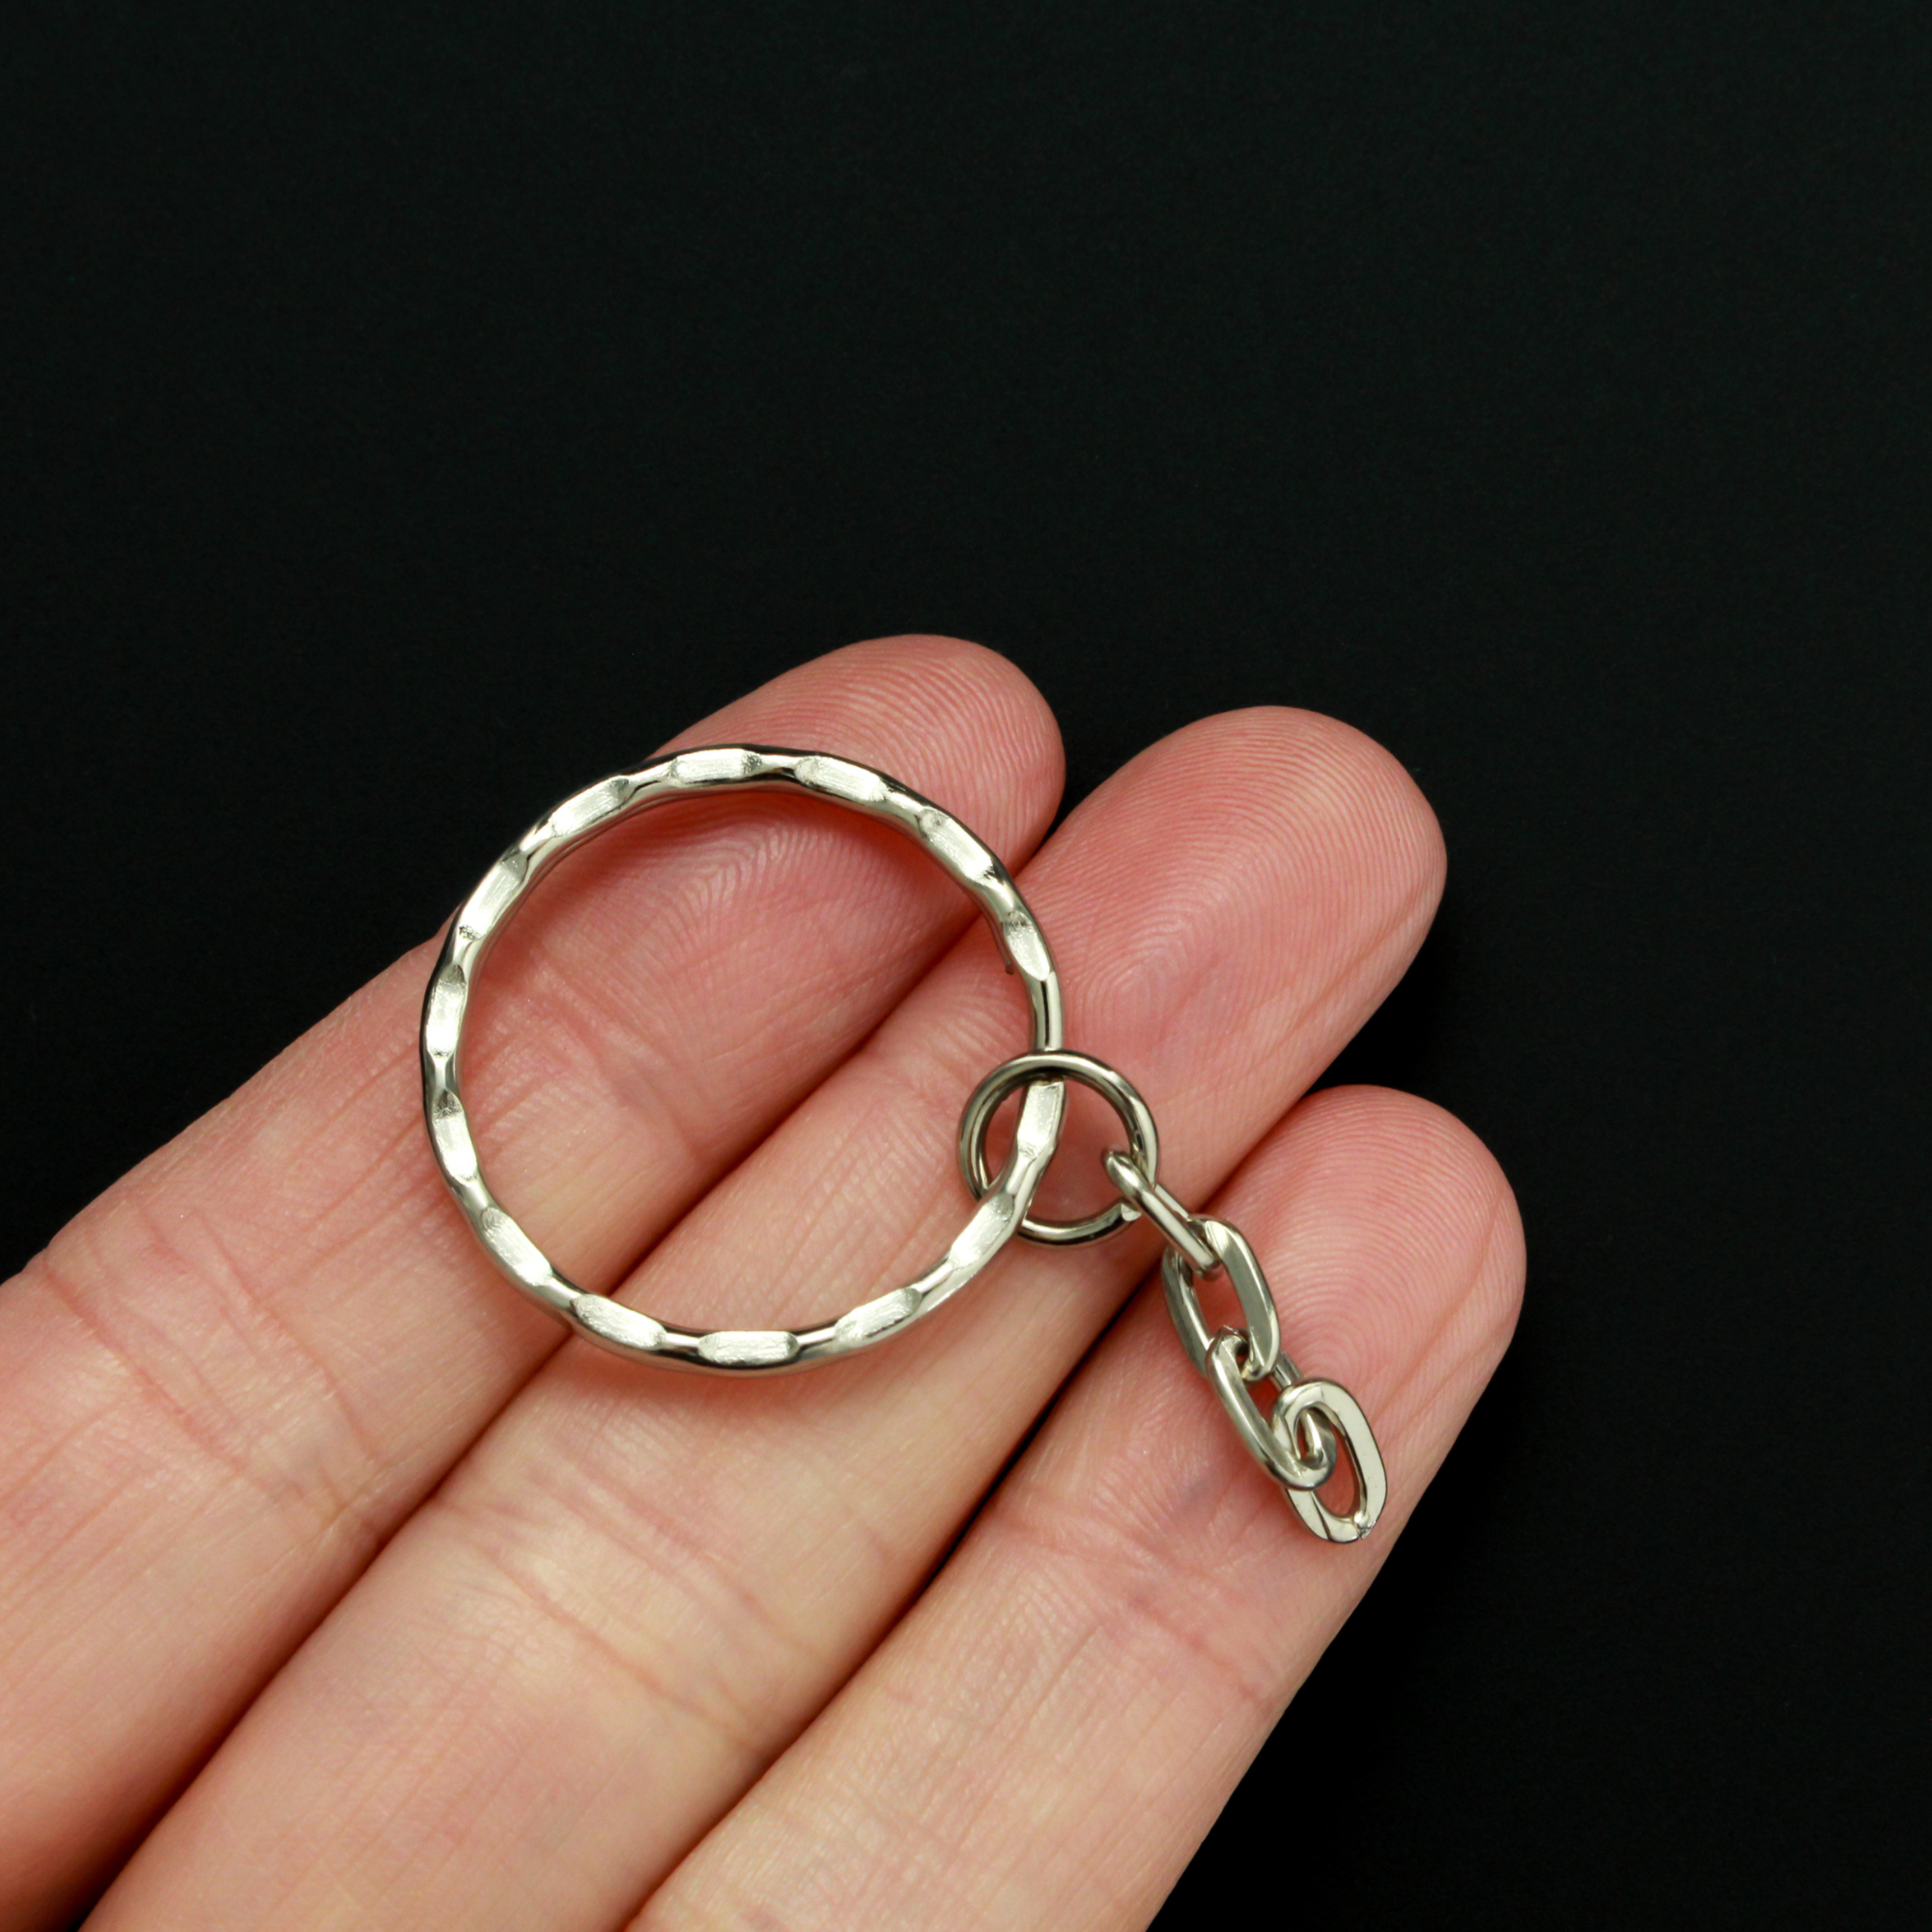 Split Key Ring with Attached Chain - Silver Tone 1 inch Textured Keyring 1pc